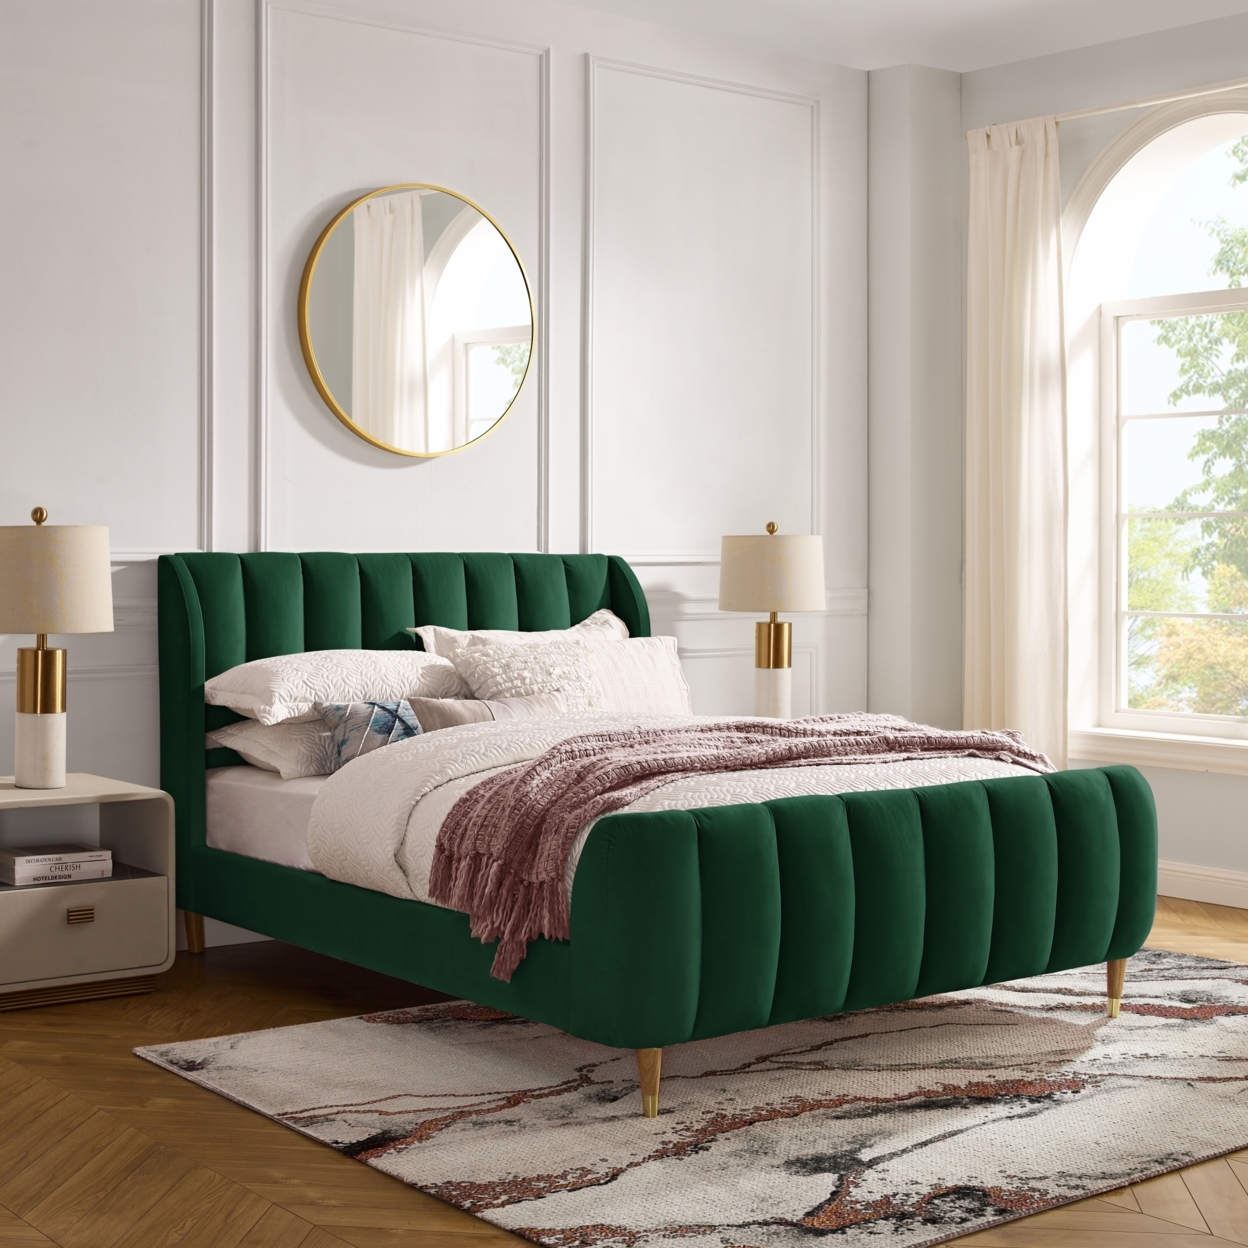 Sana Bed-Upholstered-Channel Tufted-Slats Included - Hunter Green, Queen